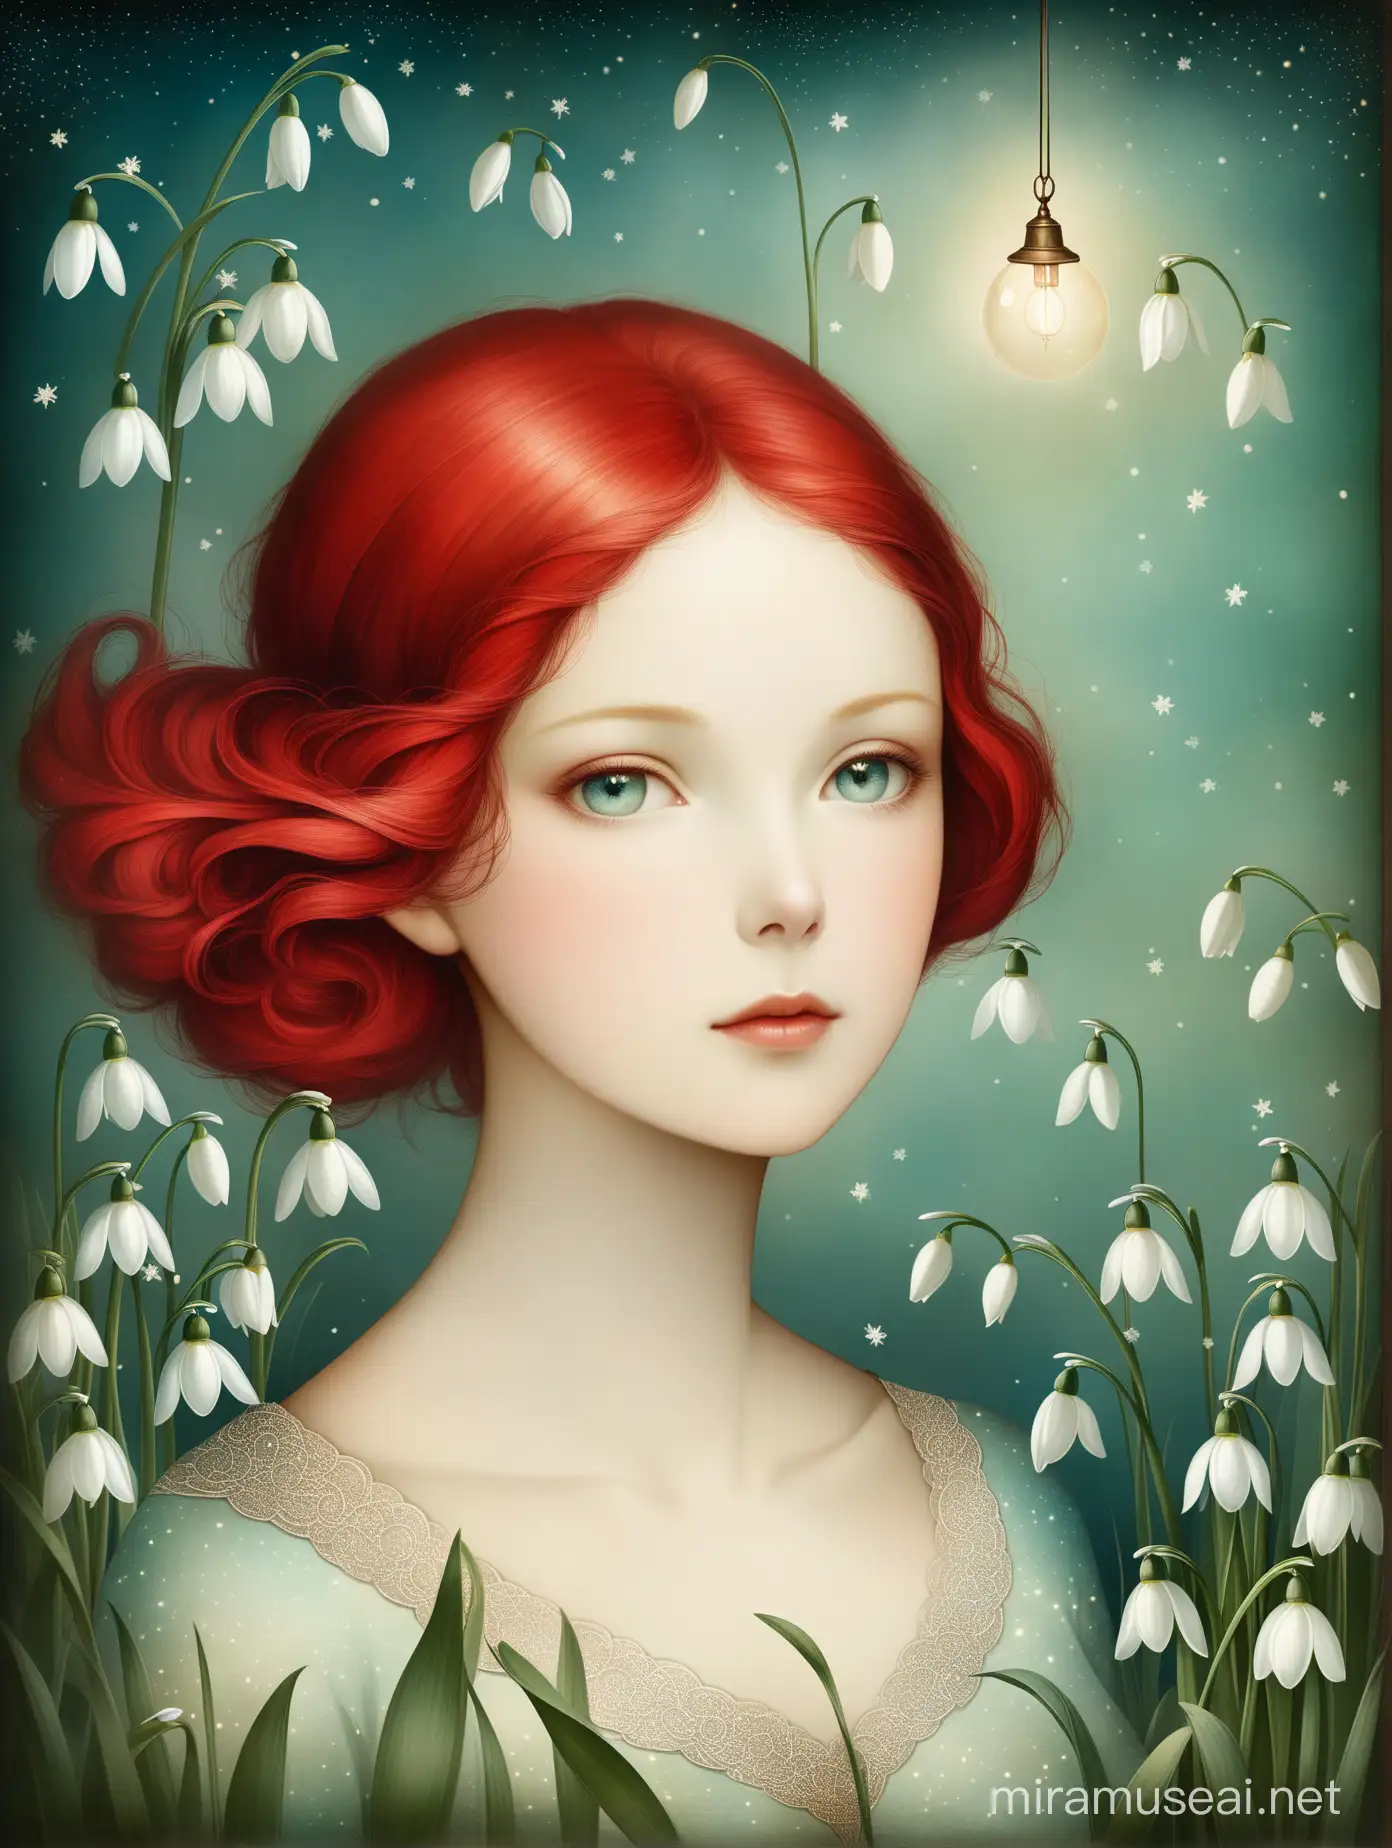 
woman's portrait with snowdrops, by Catrin Welz-Stein, dreamlike, imaginative, magical, fantasy, vintage, nostalgic, atmospheric, enchanting, haunting, red hair, dream light